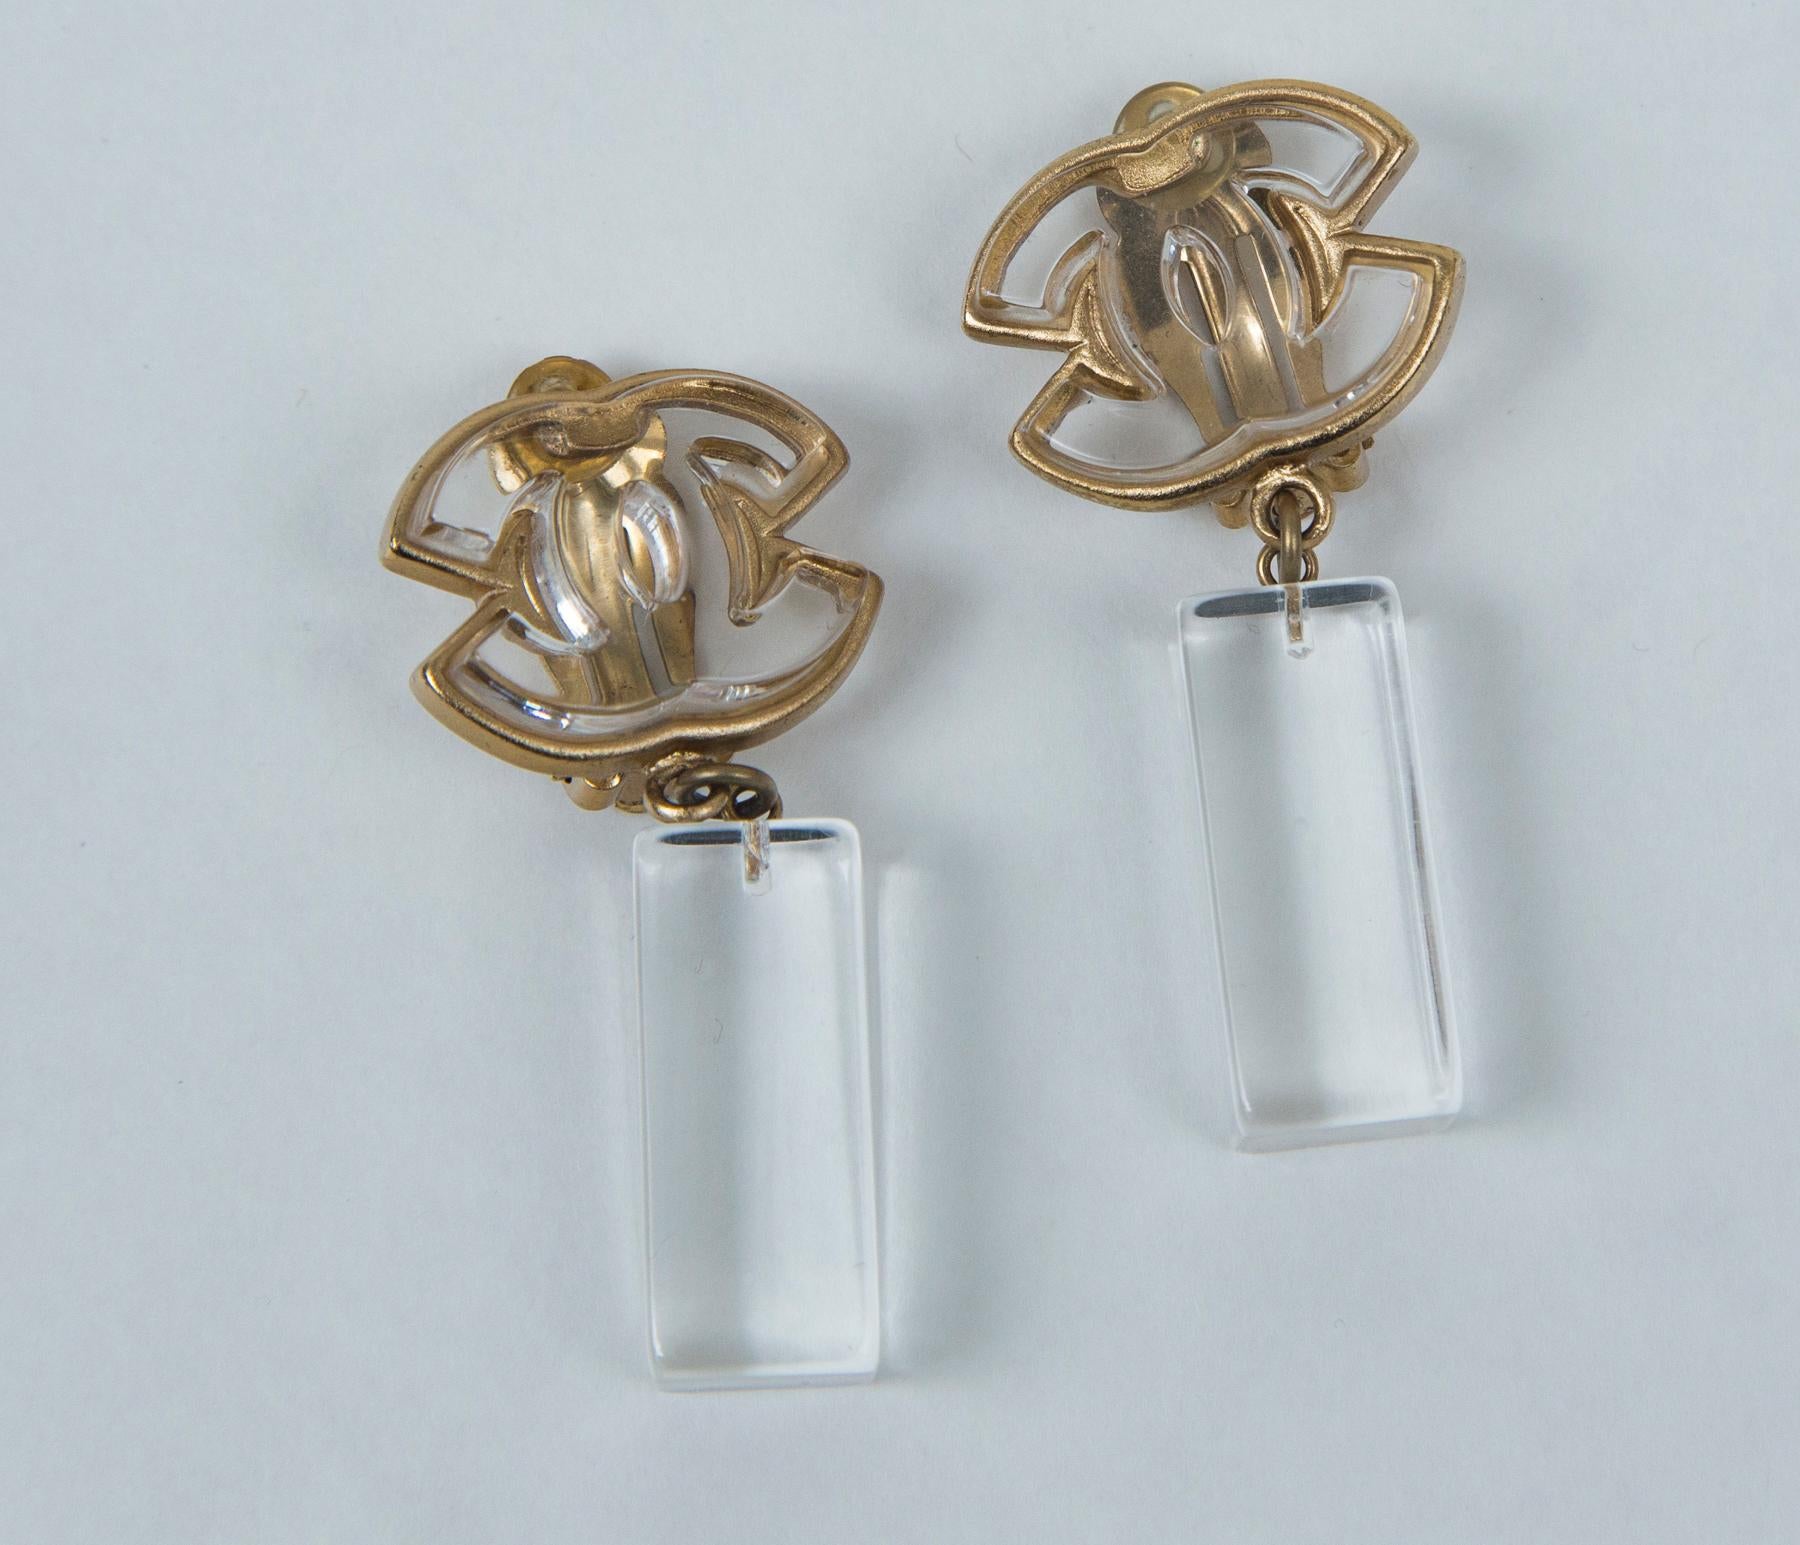 Chanel Lucite and Gold Earrings, Stamped with Chanel, CC, Made in France, 01, P (Spring)